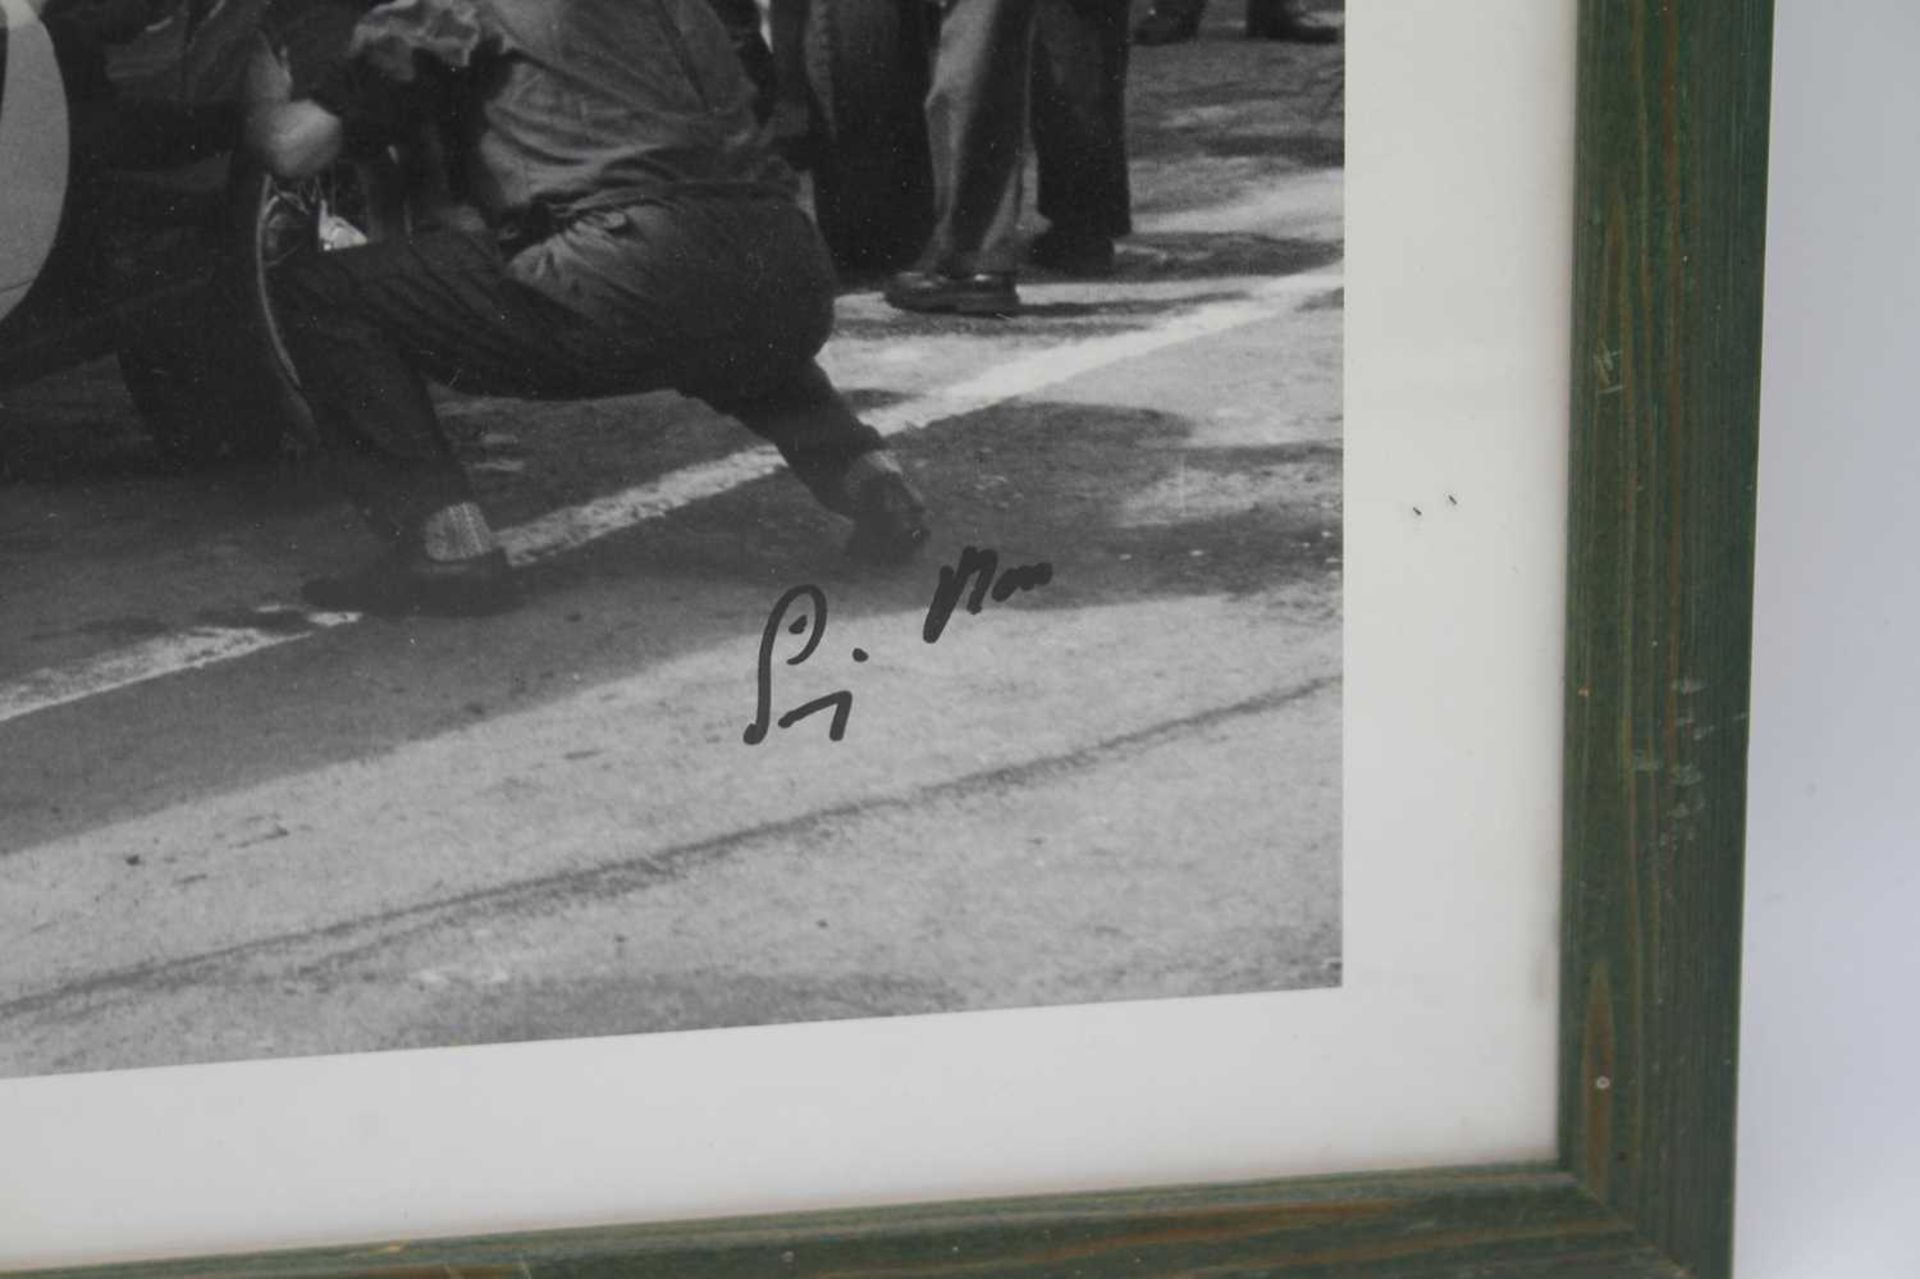 A signed photographic print of Stirling Moss in 1961 beside his SWB Ferrari 250GT, signed by Moss - Image 3 of 3